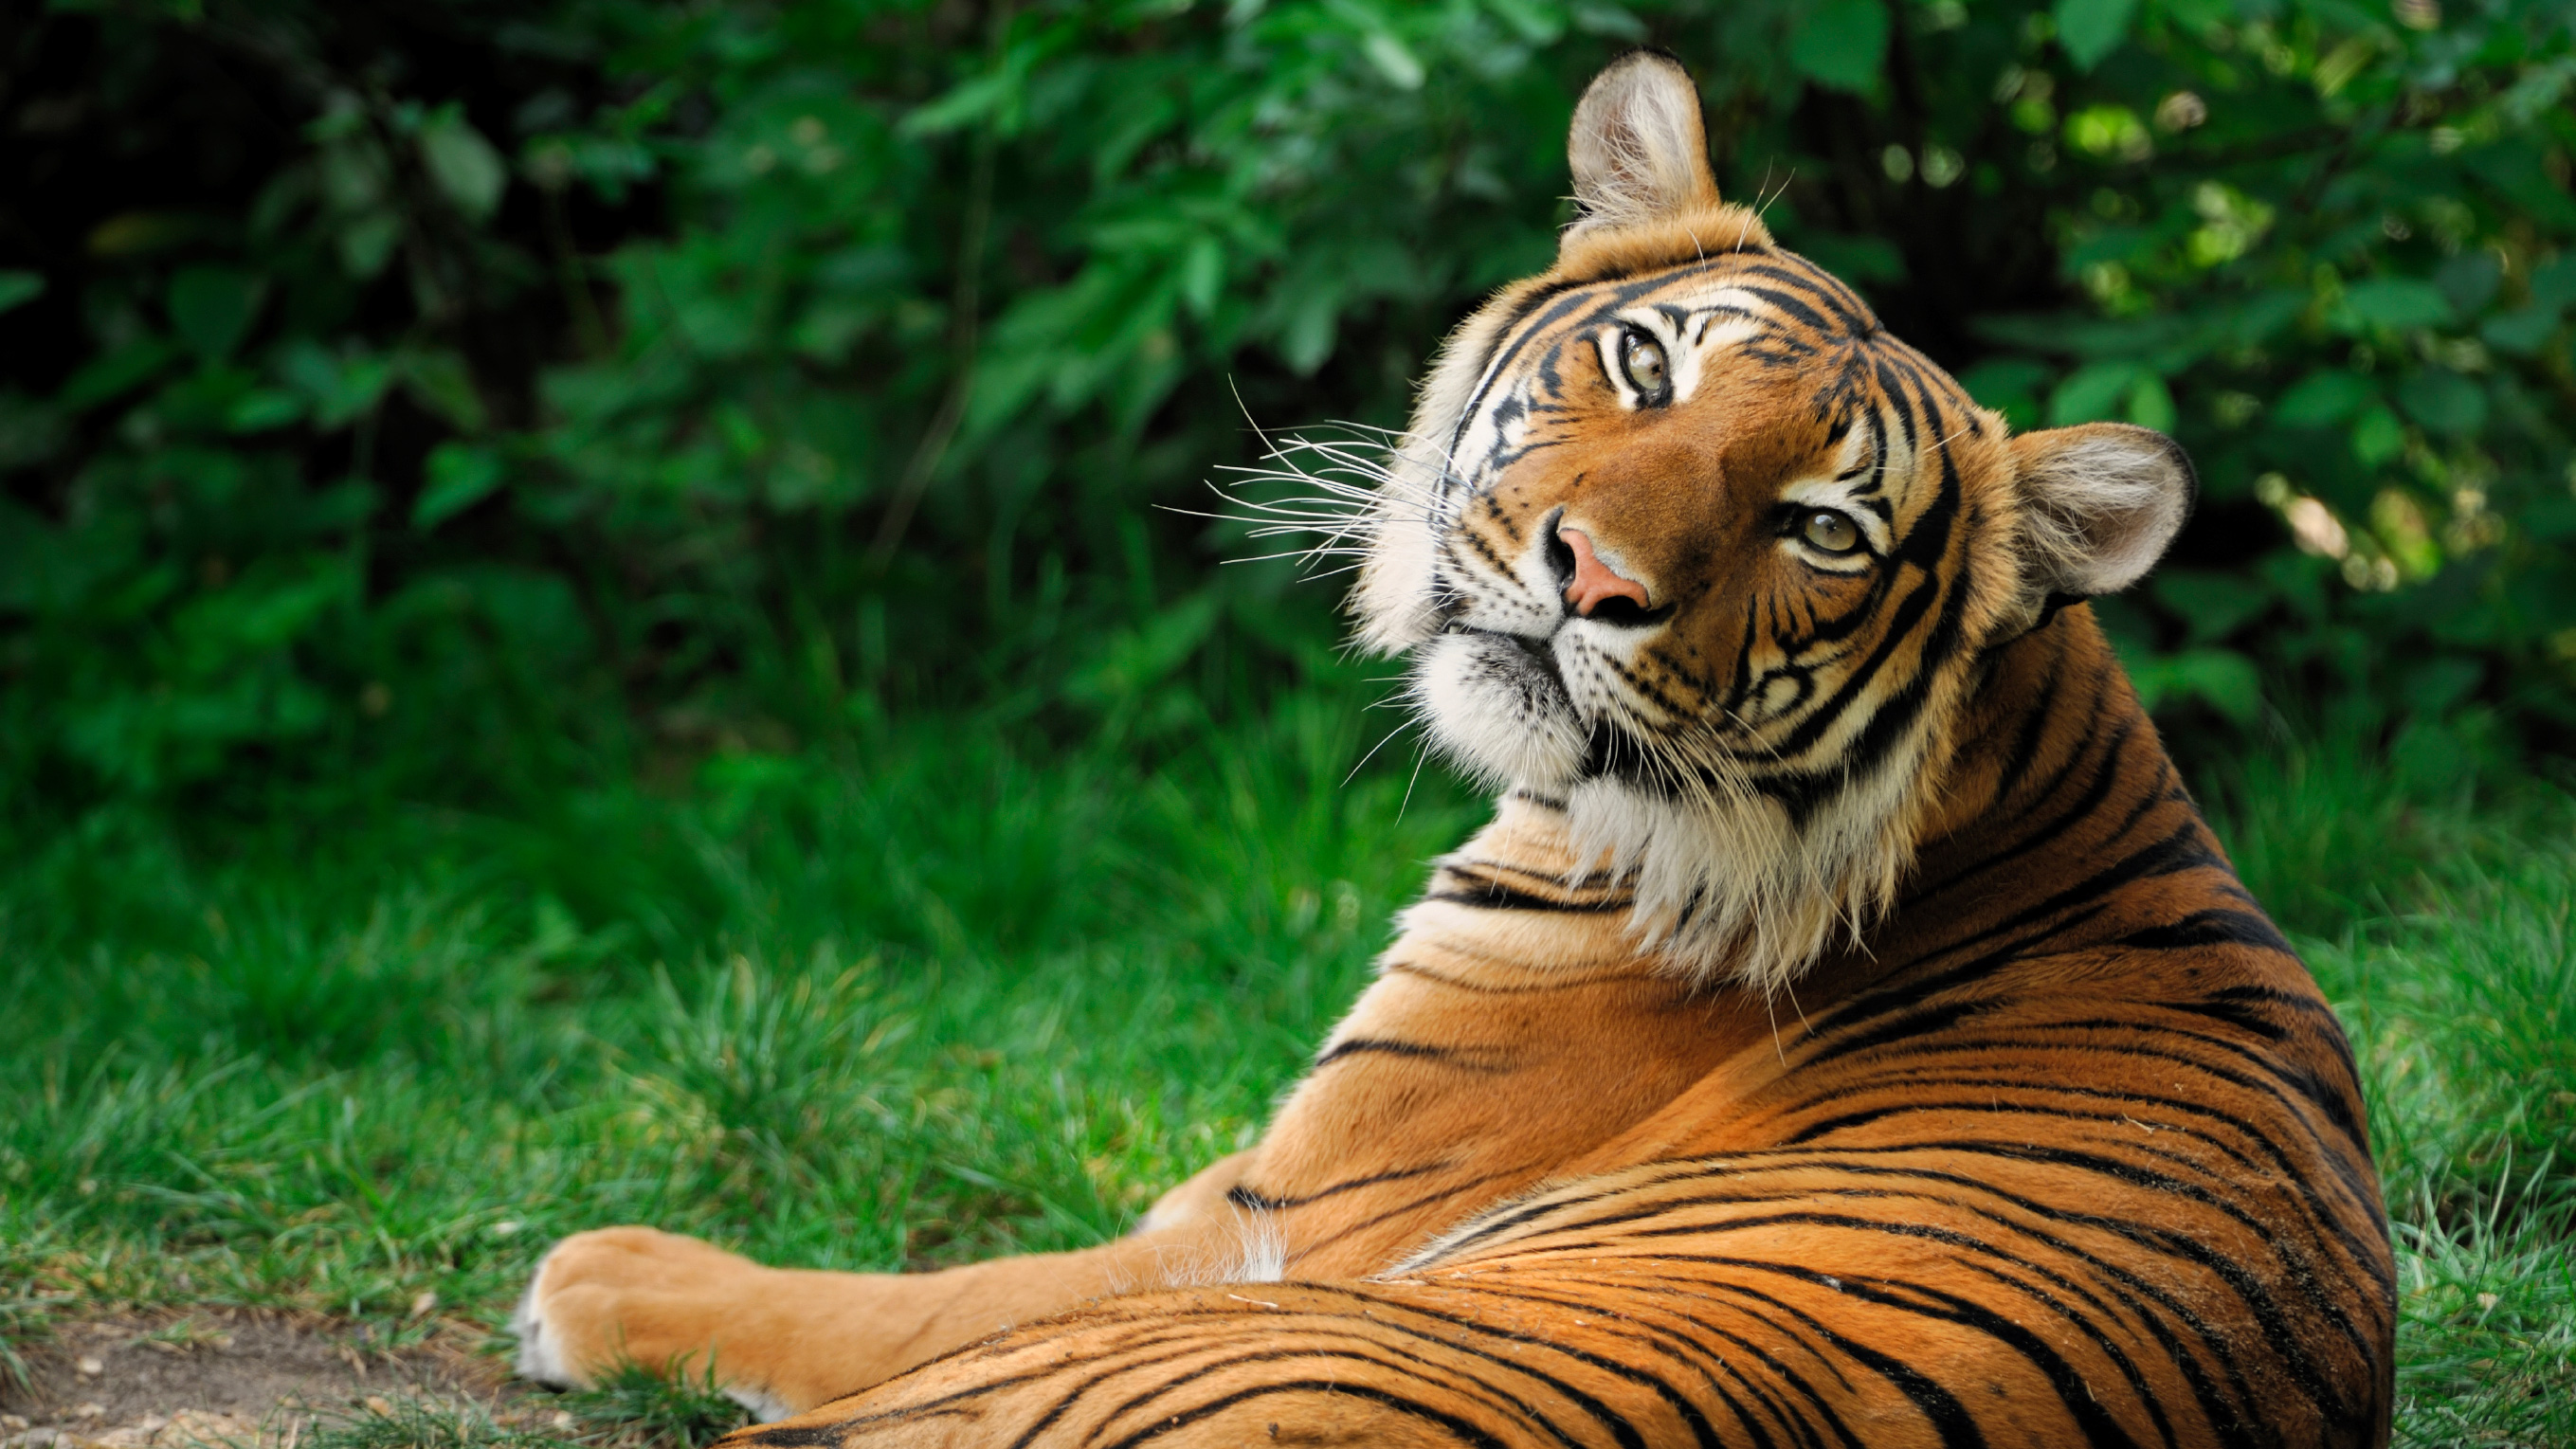 Tiger, tiger burning bright: Number of wild tigers in the world ...